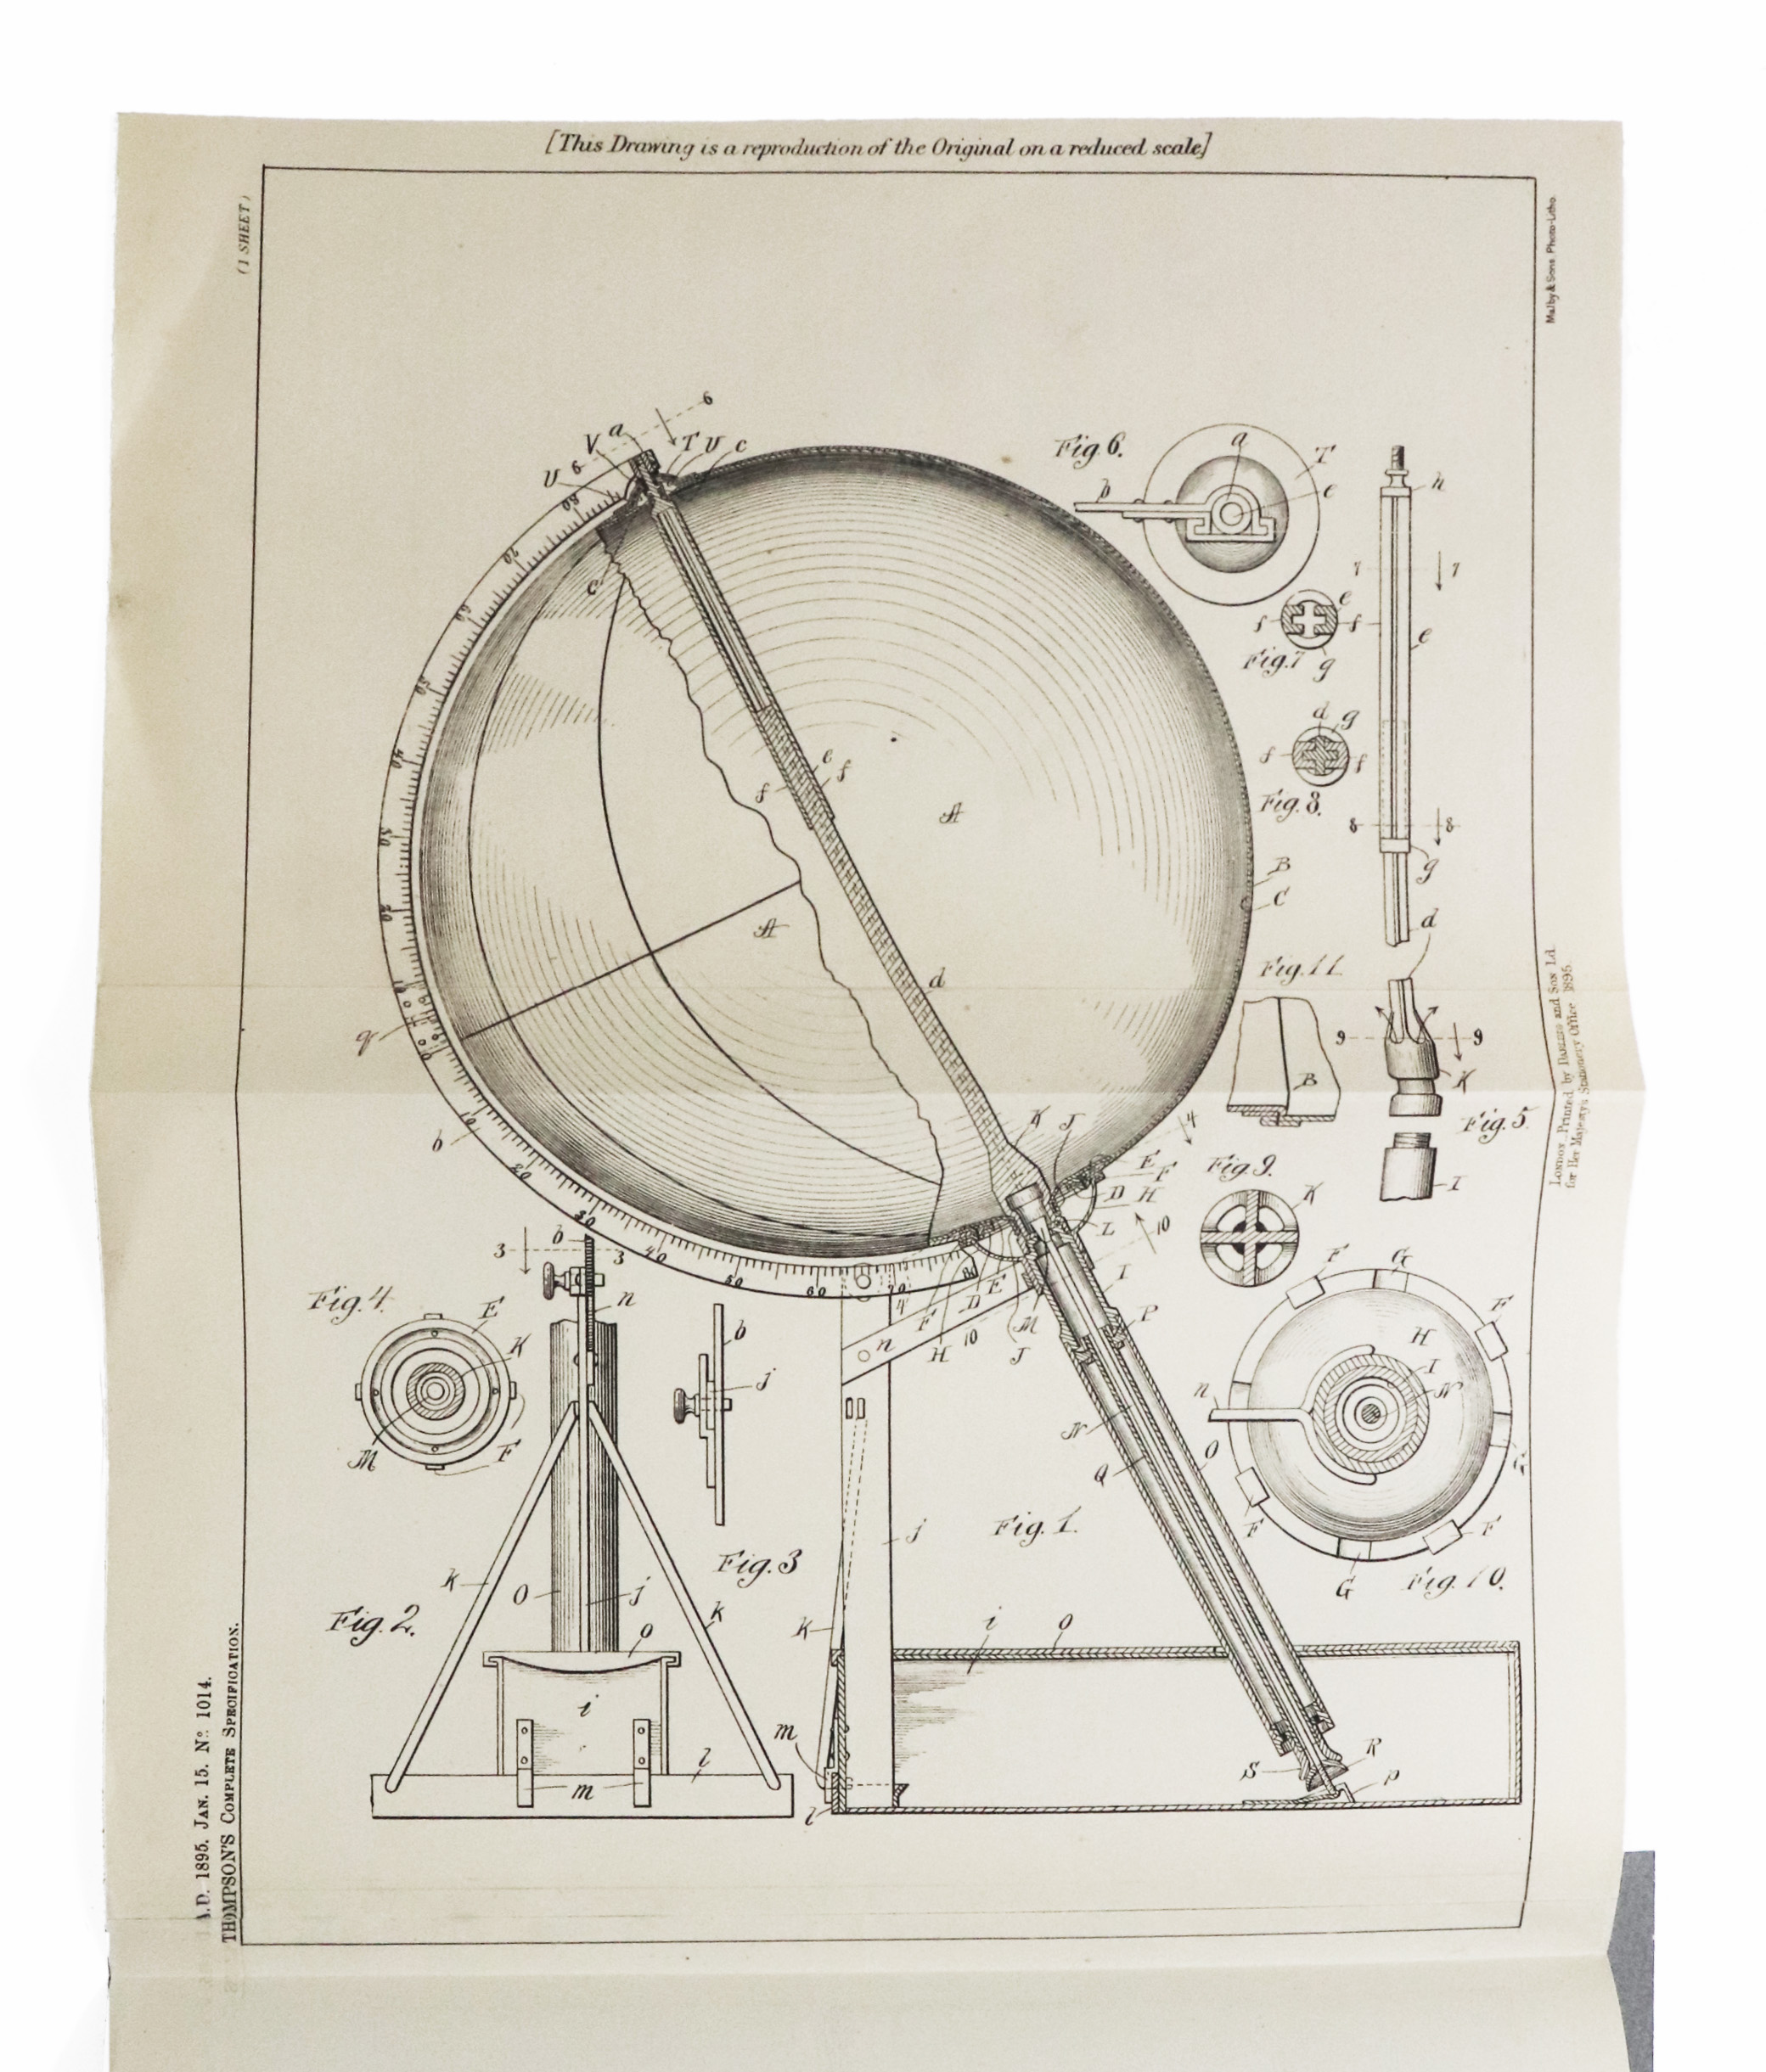 Patent for inflatable globes, 1895, invented by Isaac and Mary Ann Hodgson of Chicago